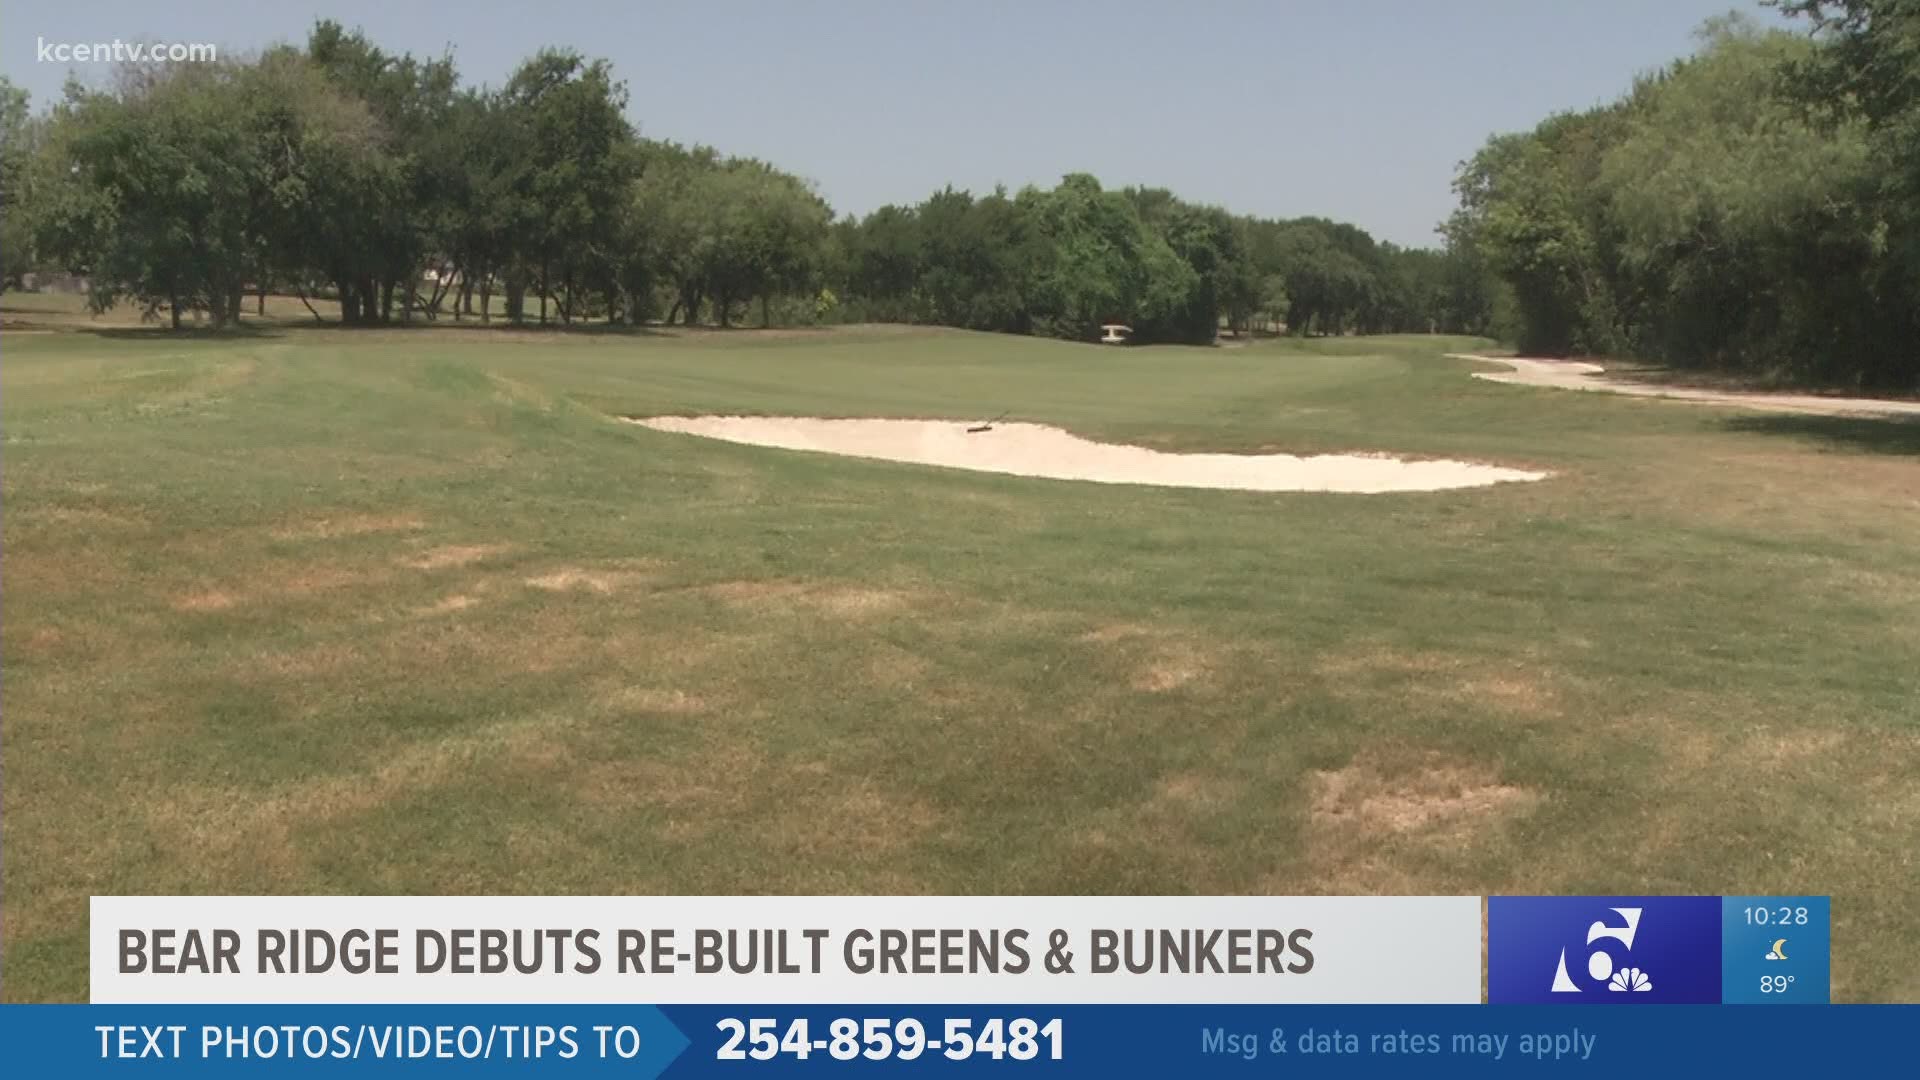 After years of disrepair, the golf course unveiled its first step toward becoming a destination course.